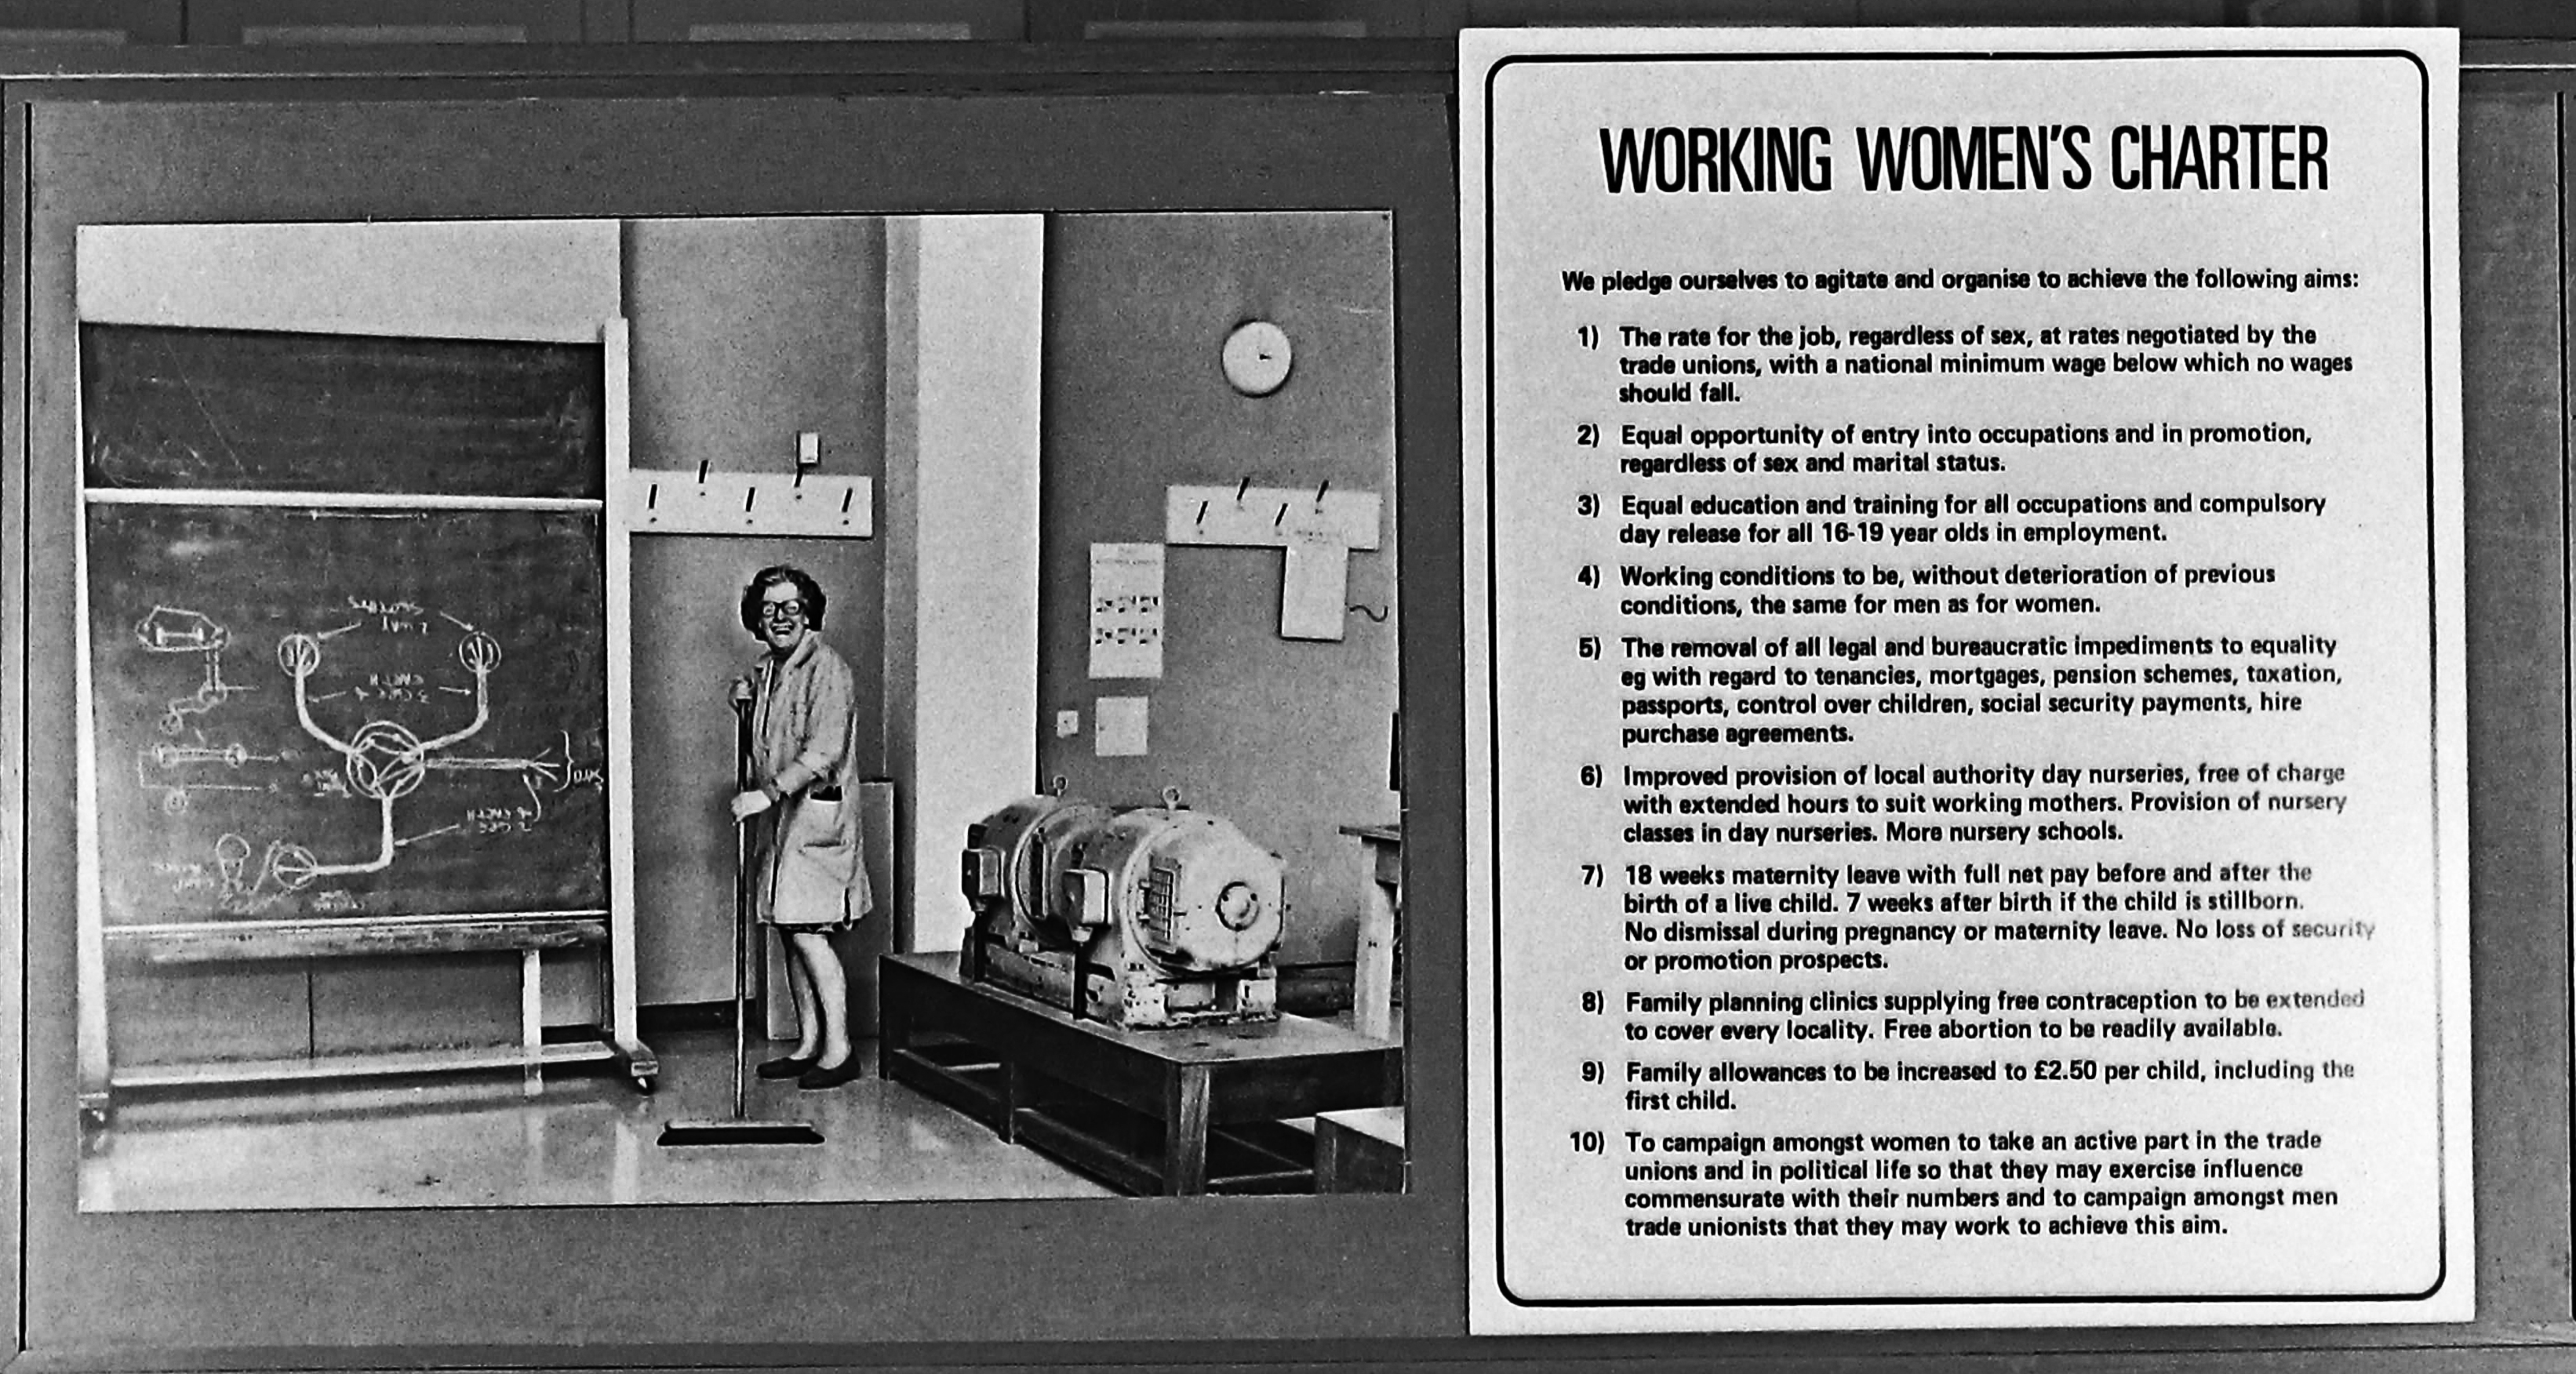 A panel from Women and Work by the Hackney Flashers includes an image of a woman working as a cleaner at a college and text from The Working Women's Charter.